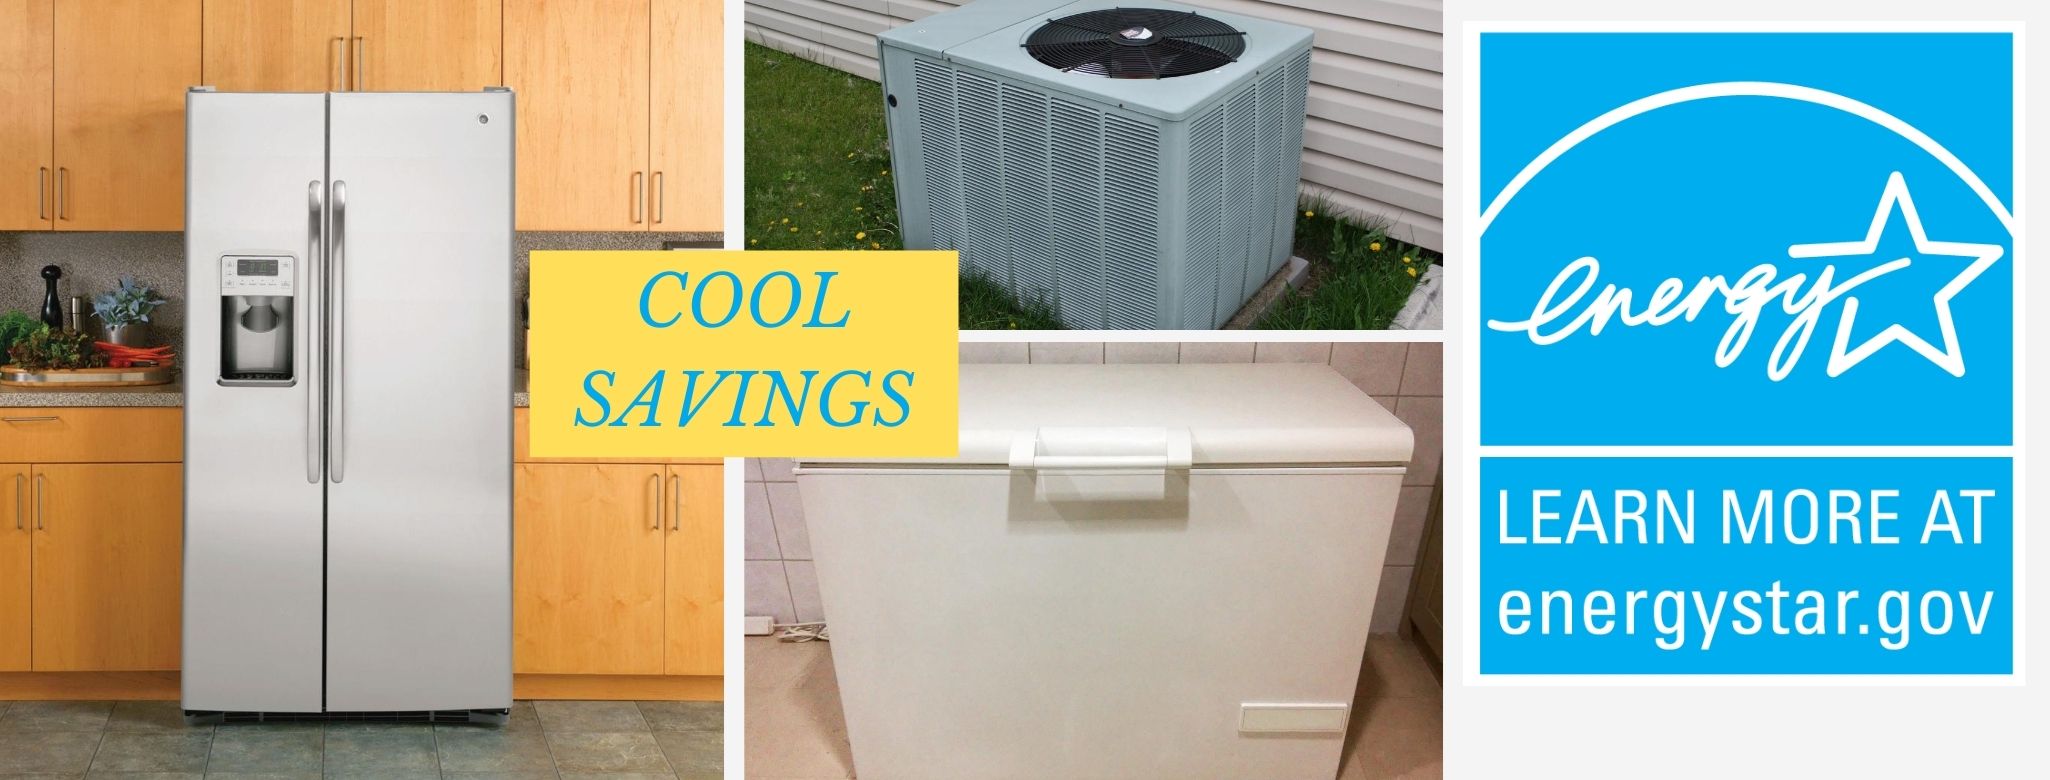 Energy Star Appliance Rebate Collage